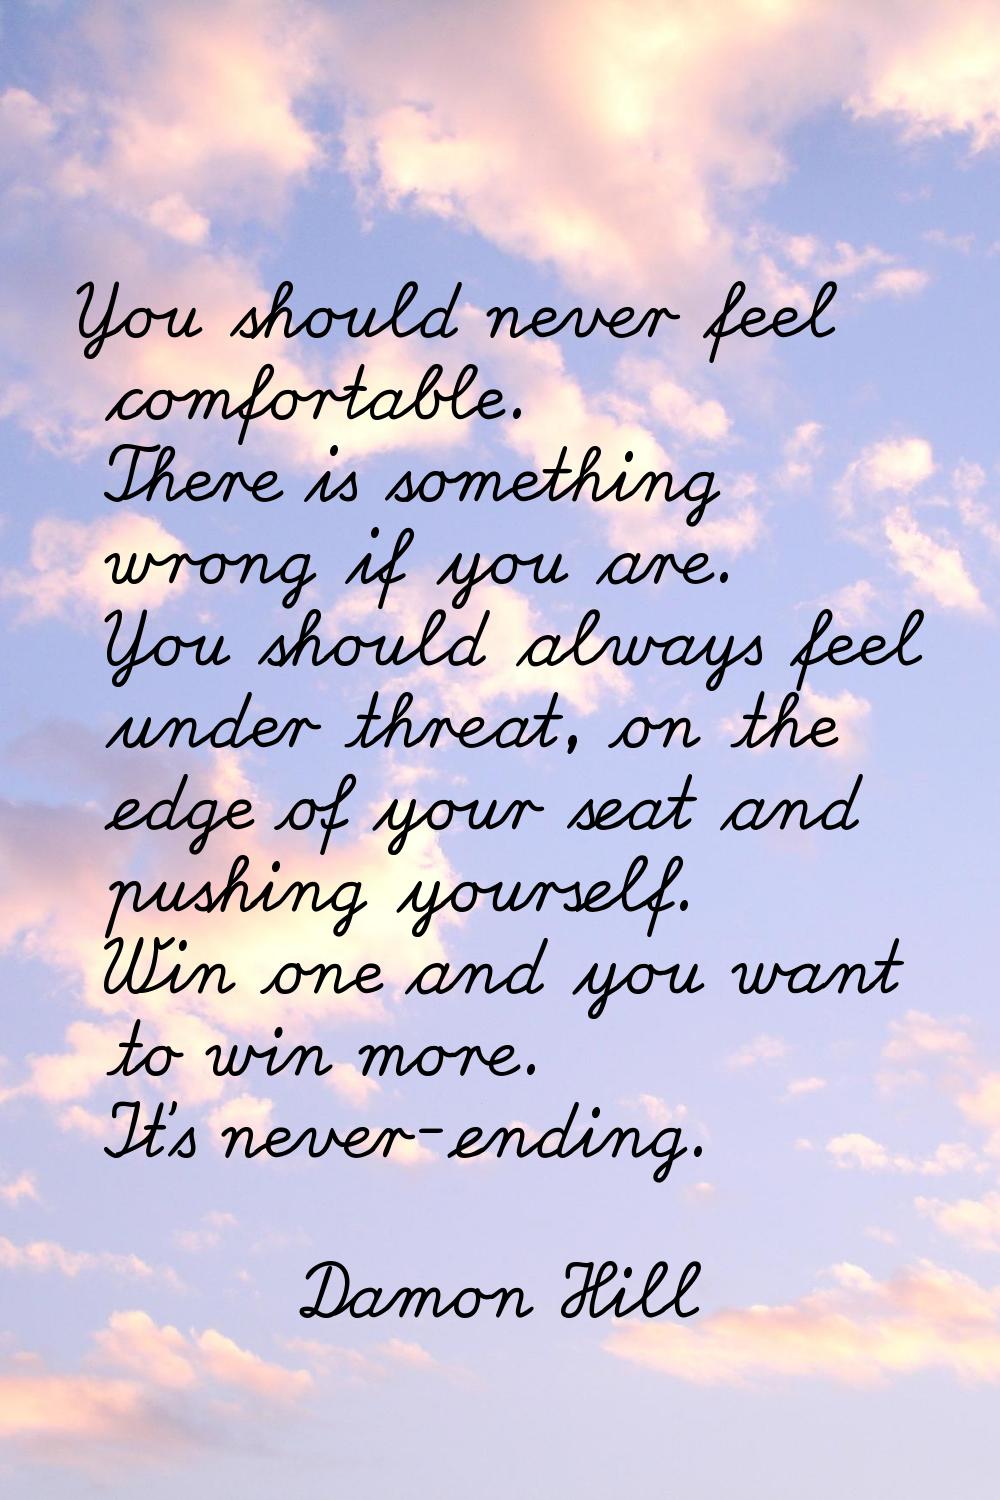 You should never feel comfortable. There is something wrong if you are. You should always feel unde